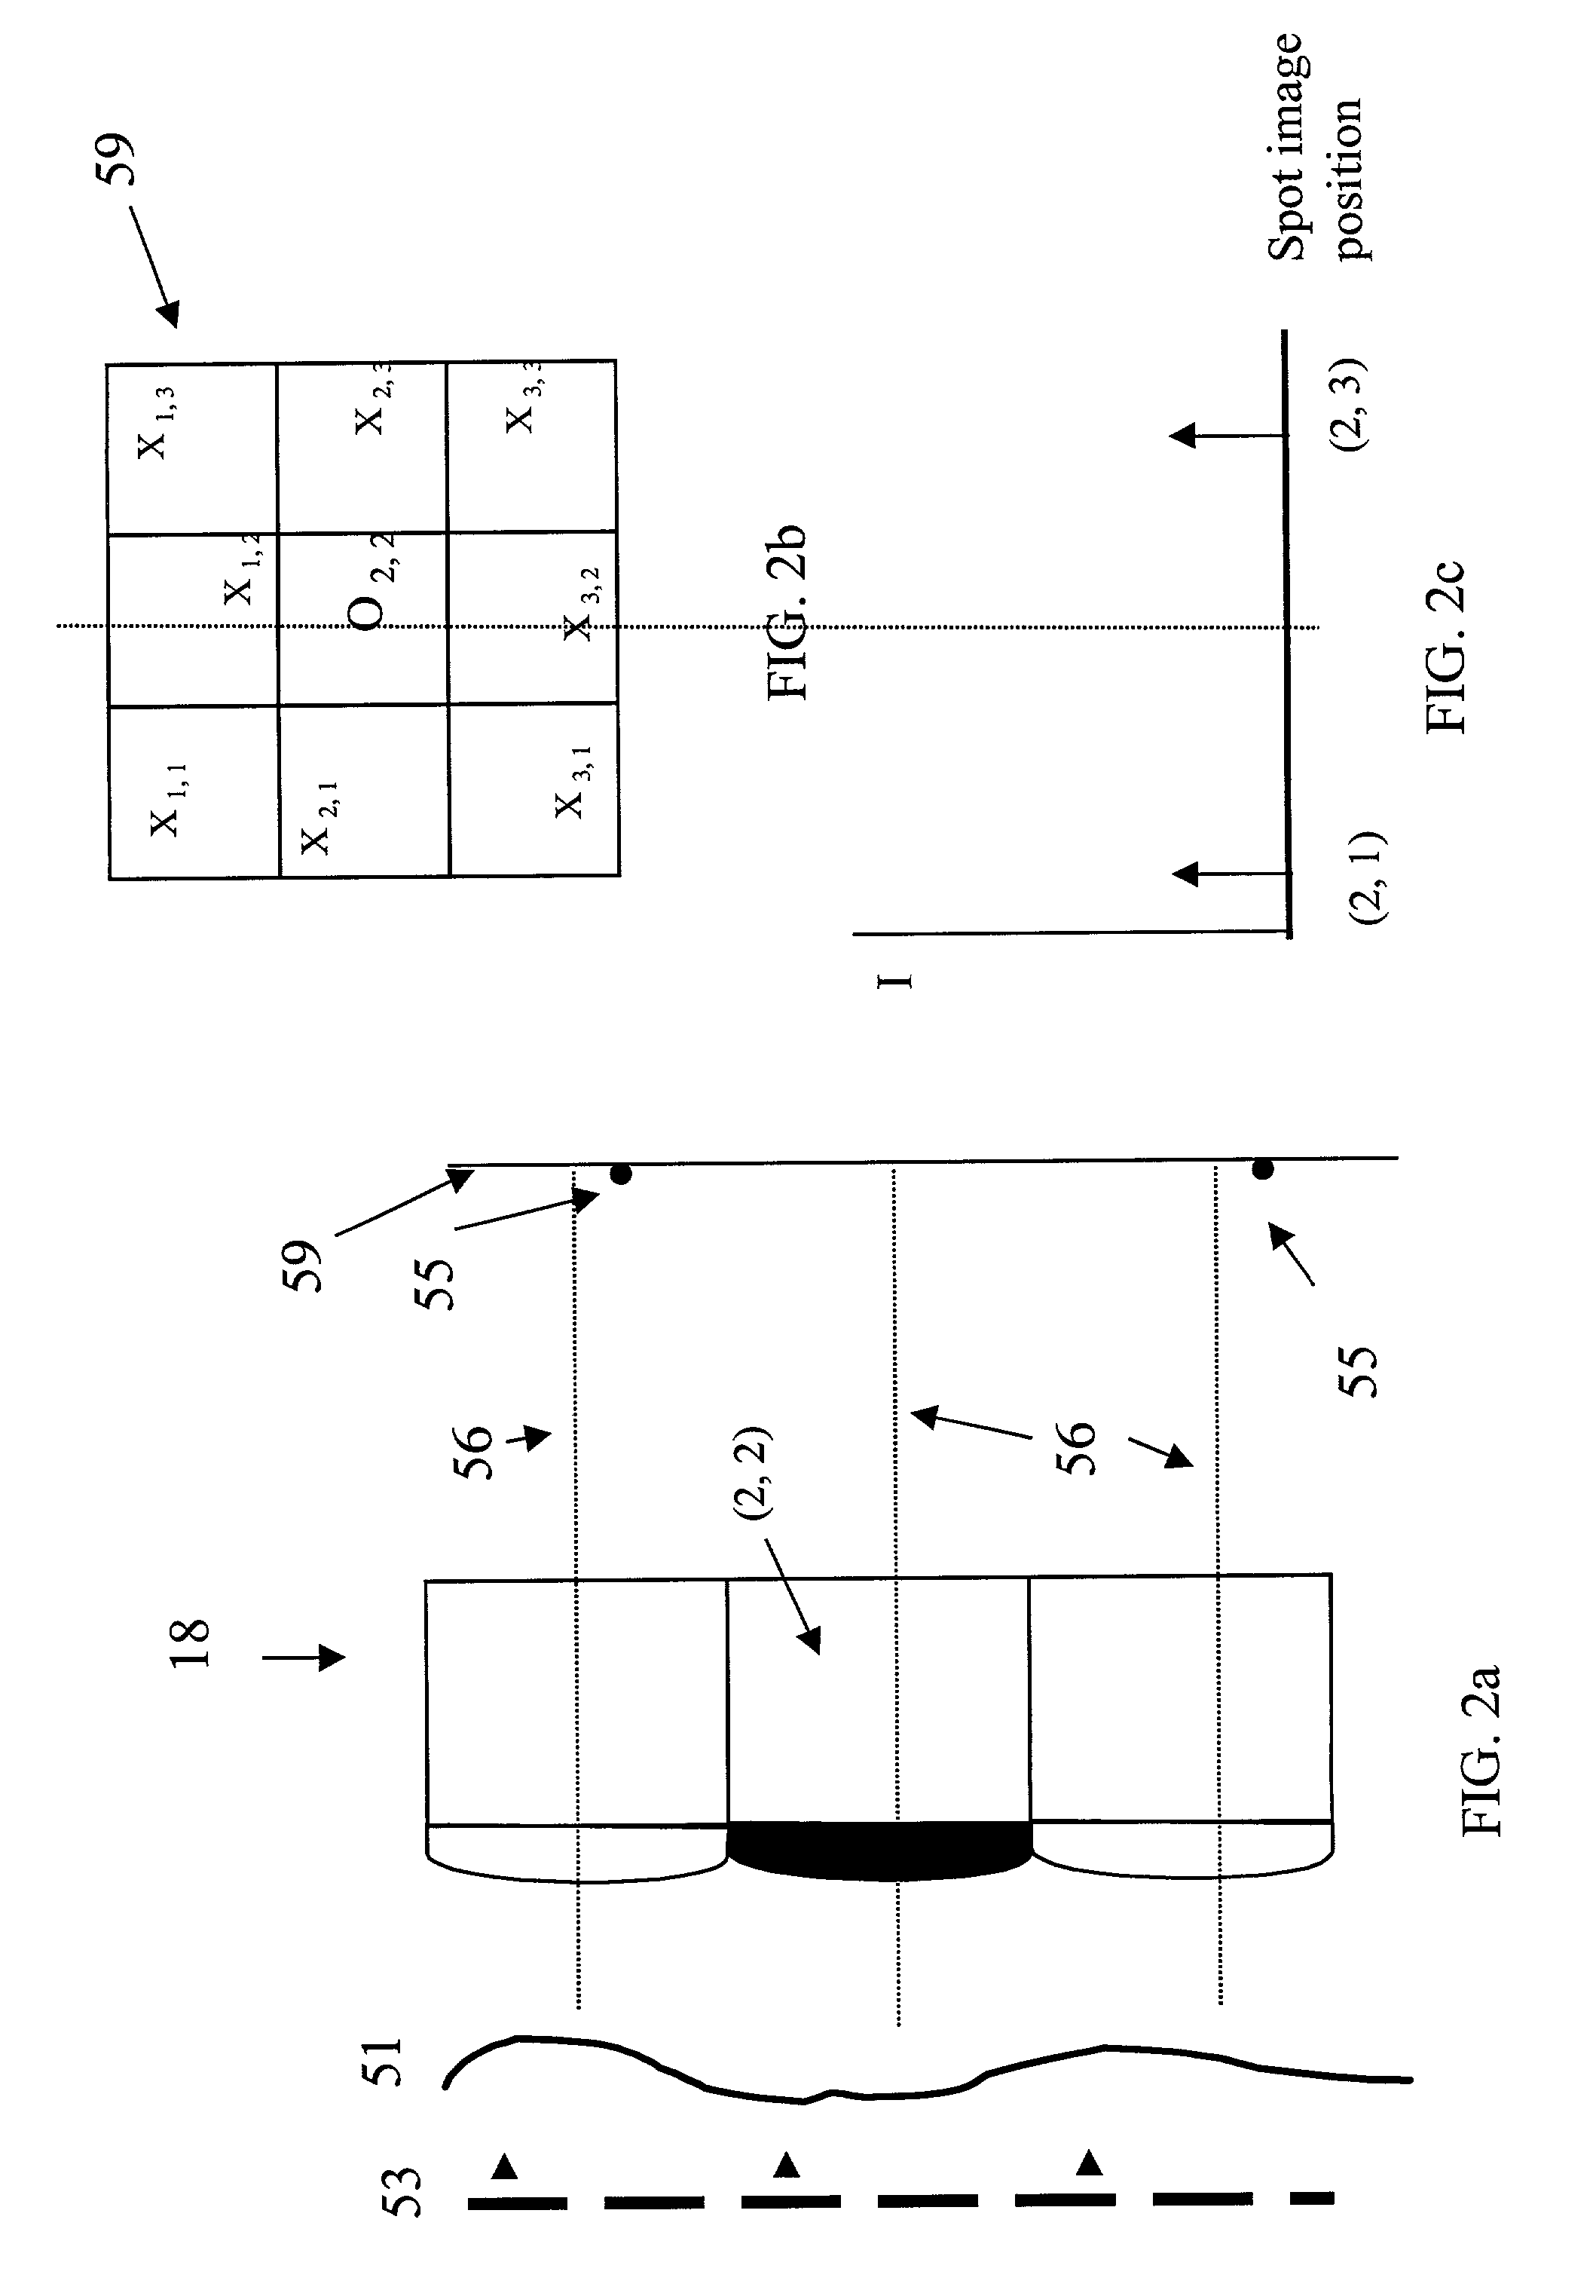 Method and apparatus for improving the dynamic range and accuracy of a Shack-Hartmann wavefront sensor